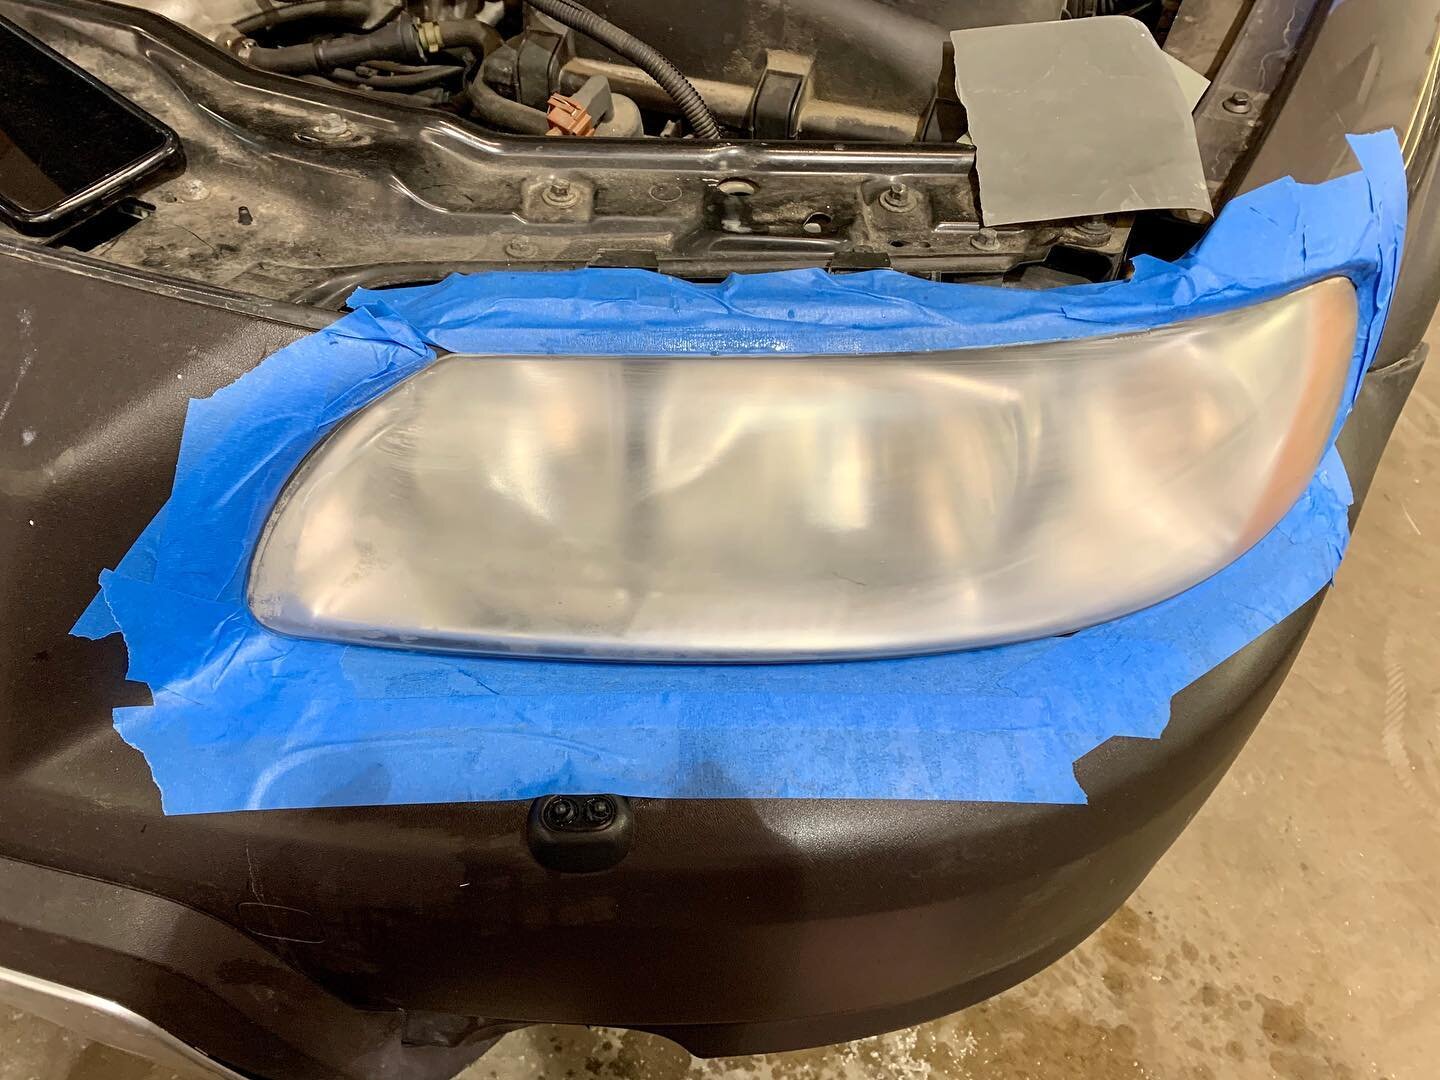 A job well done! BEFORE and AFTER photos of headlight restoration. Reach out to get yours done too! #Cars #Headlights #Restoration #Wash #HeadlightRestoration #Detail #Clean #Clear #Visibility